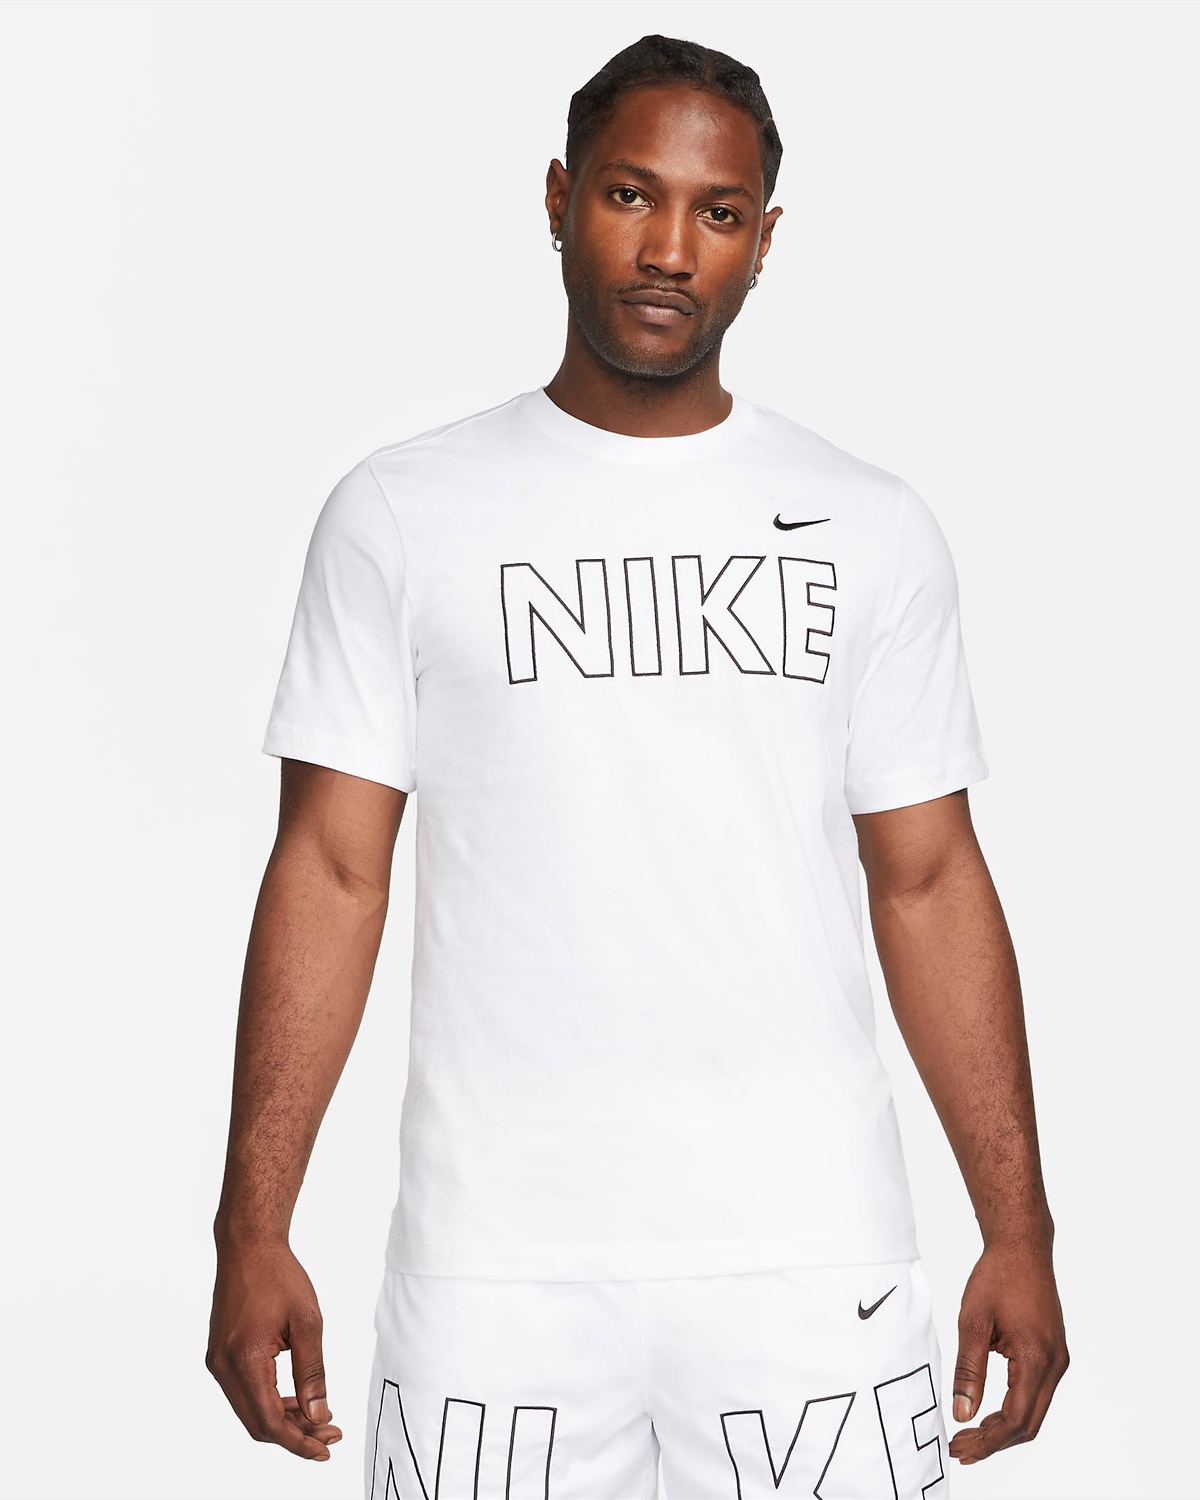 Nike Dunk Low CLOT Fragment Design Shirts Clothing Outfits